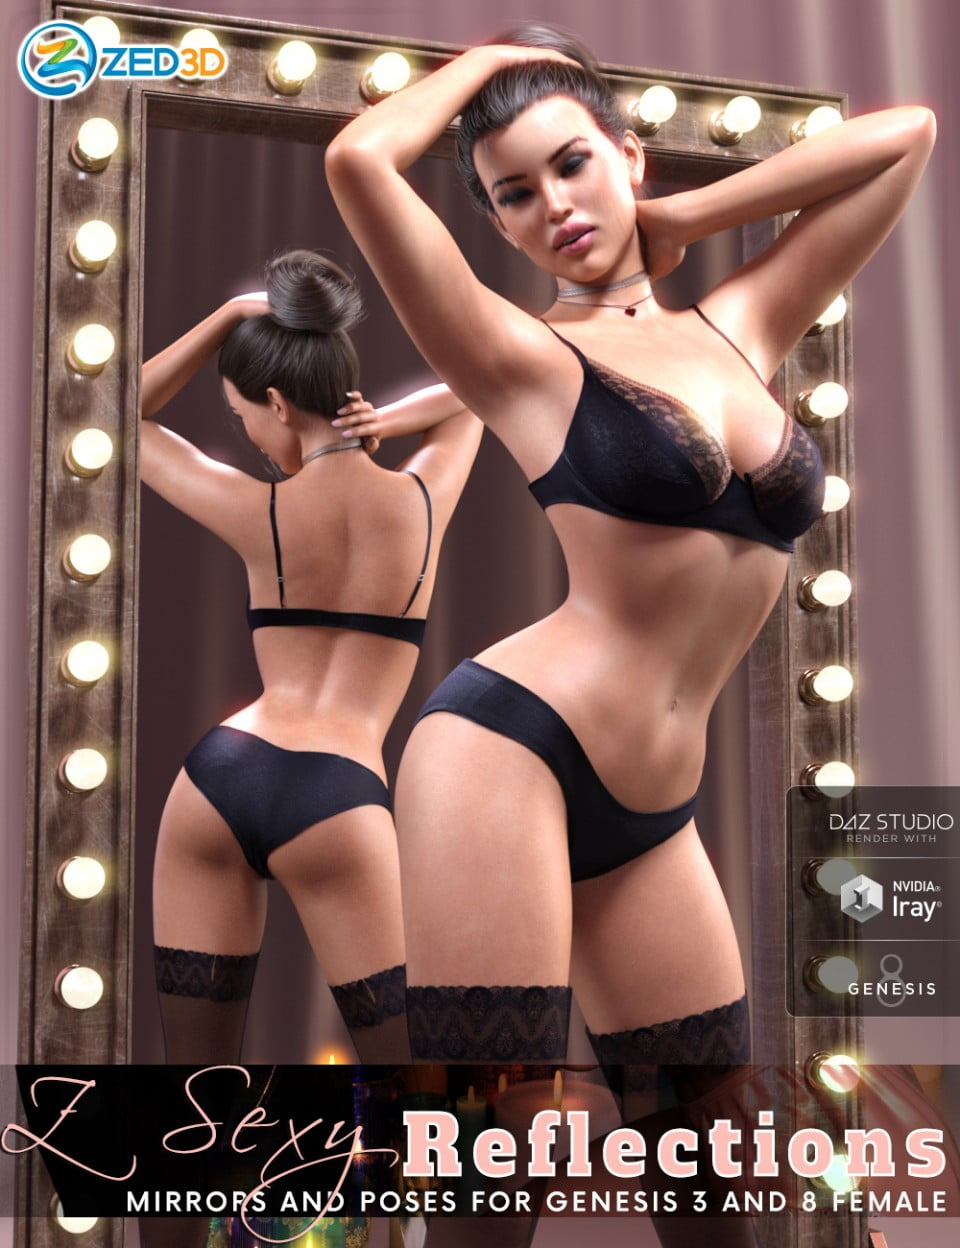 Z Sexy Reflections Mirrors And Poses For Genesis 3 And 8 Female 3d 